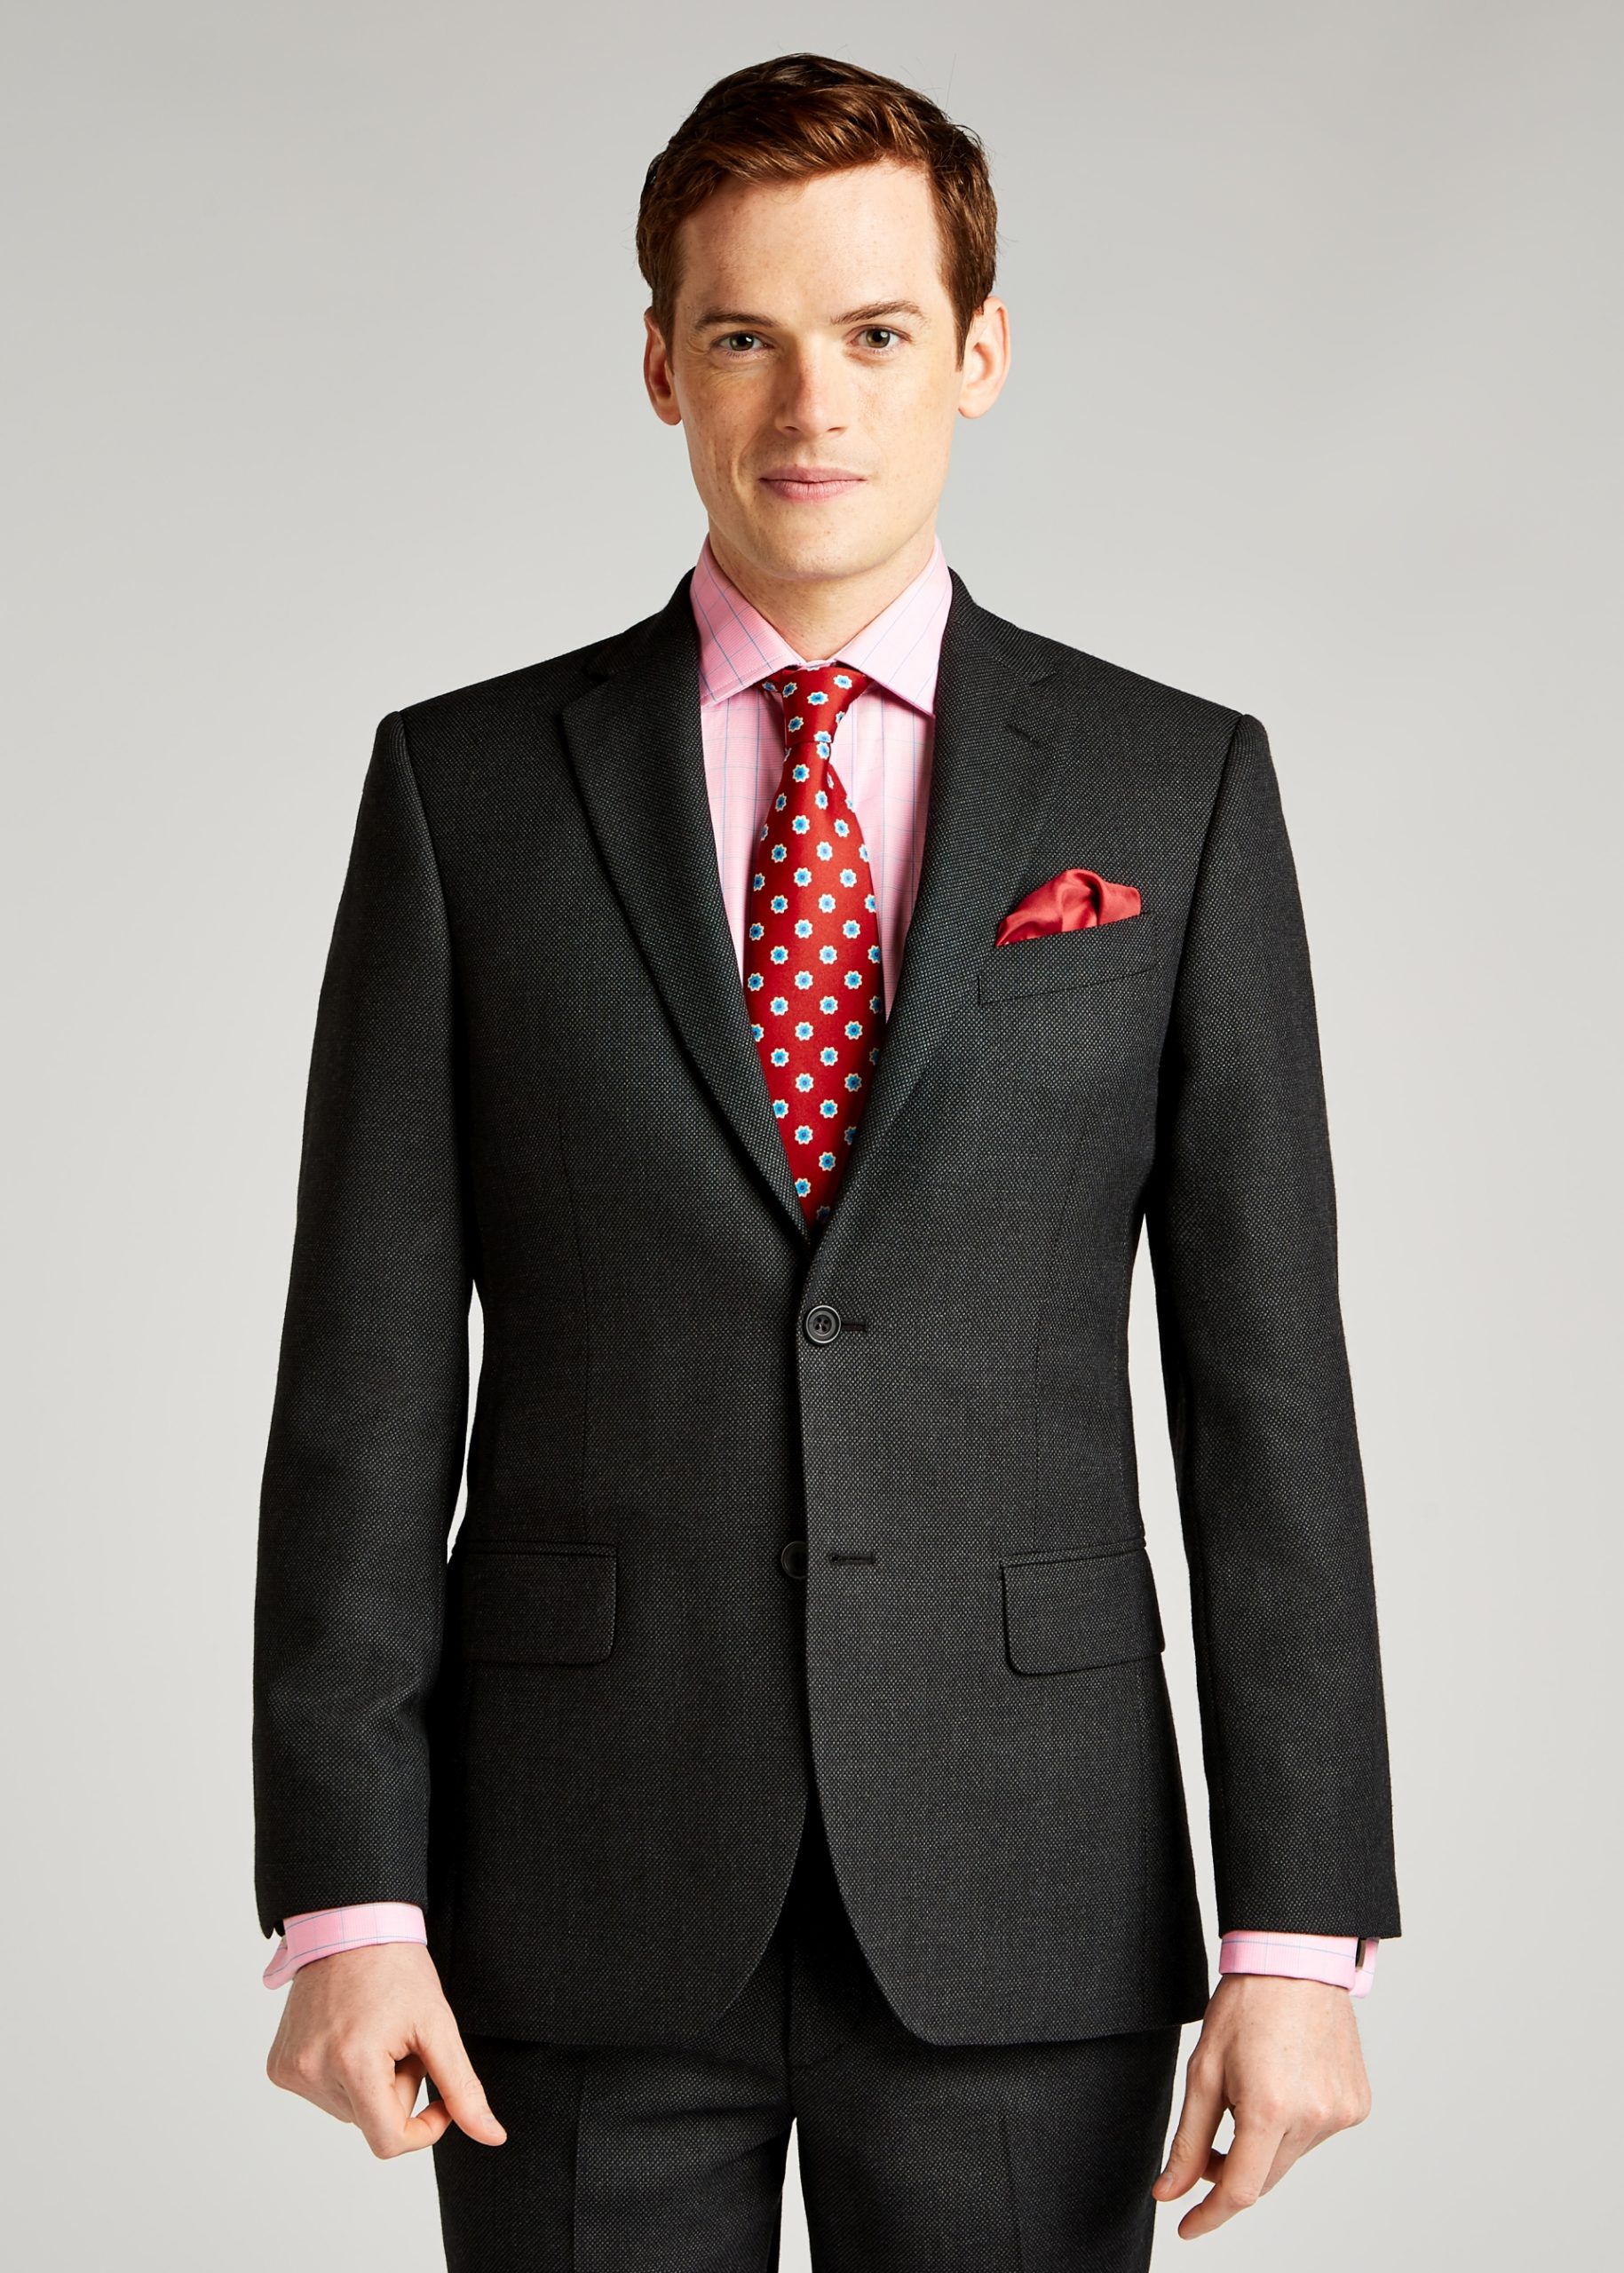 Roderick Charles tailored fit charcoal suit styled with silk pocket square, brogues and tie